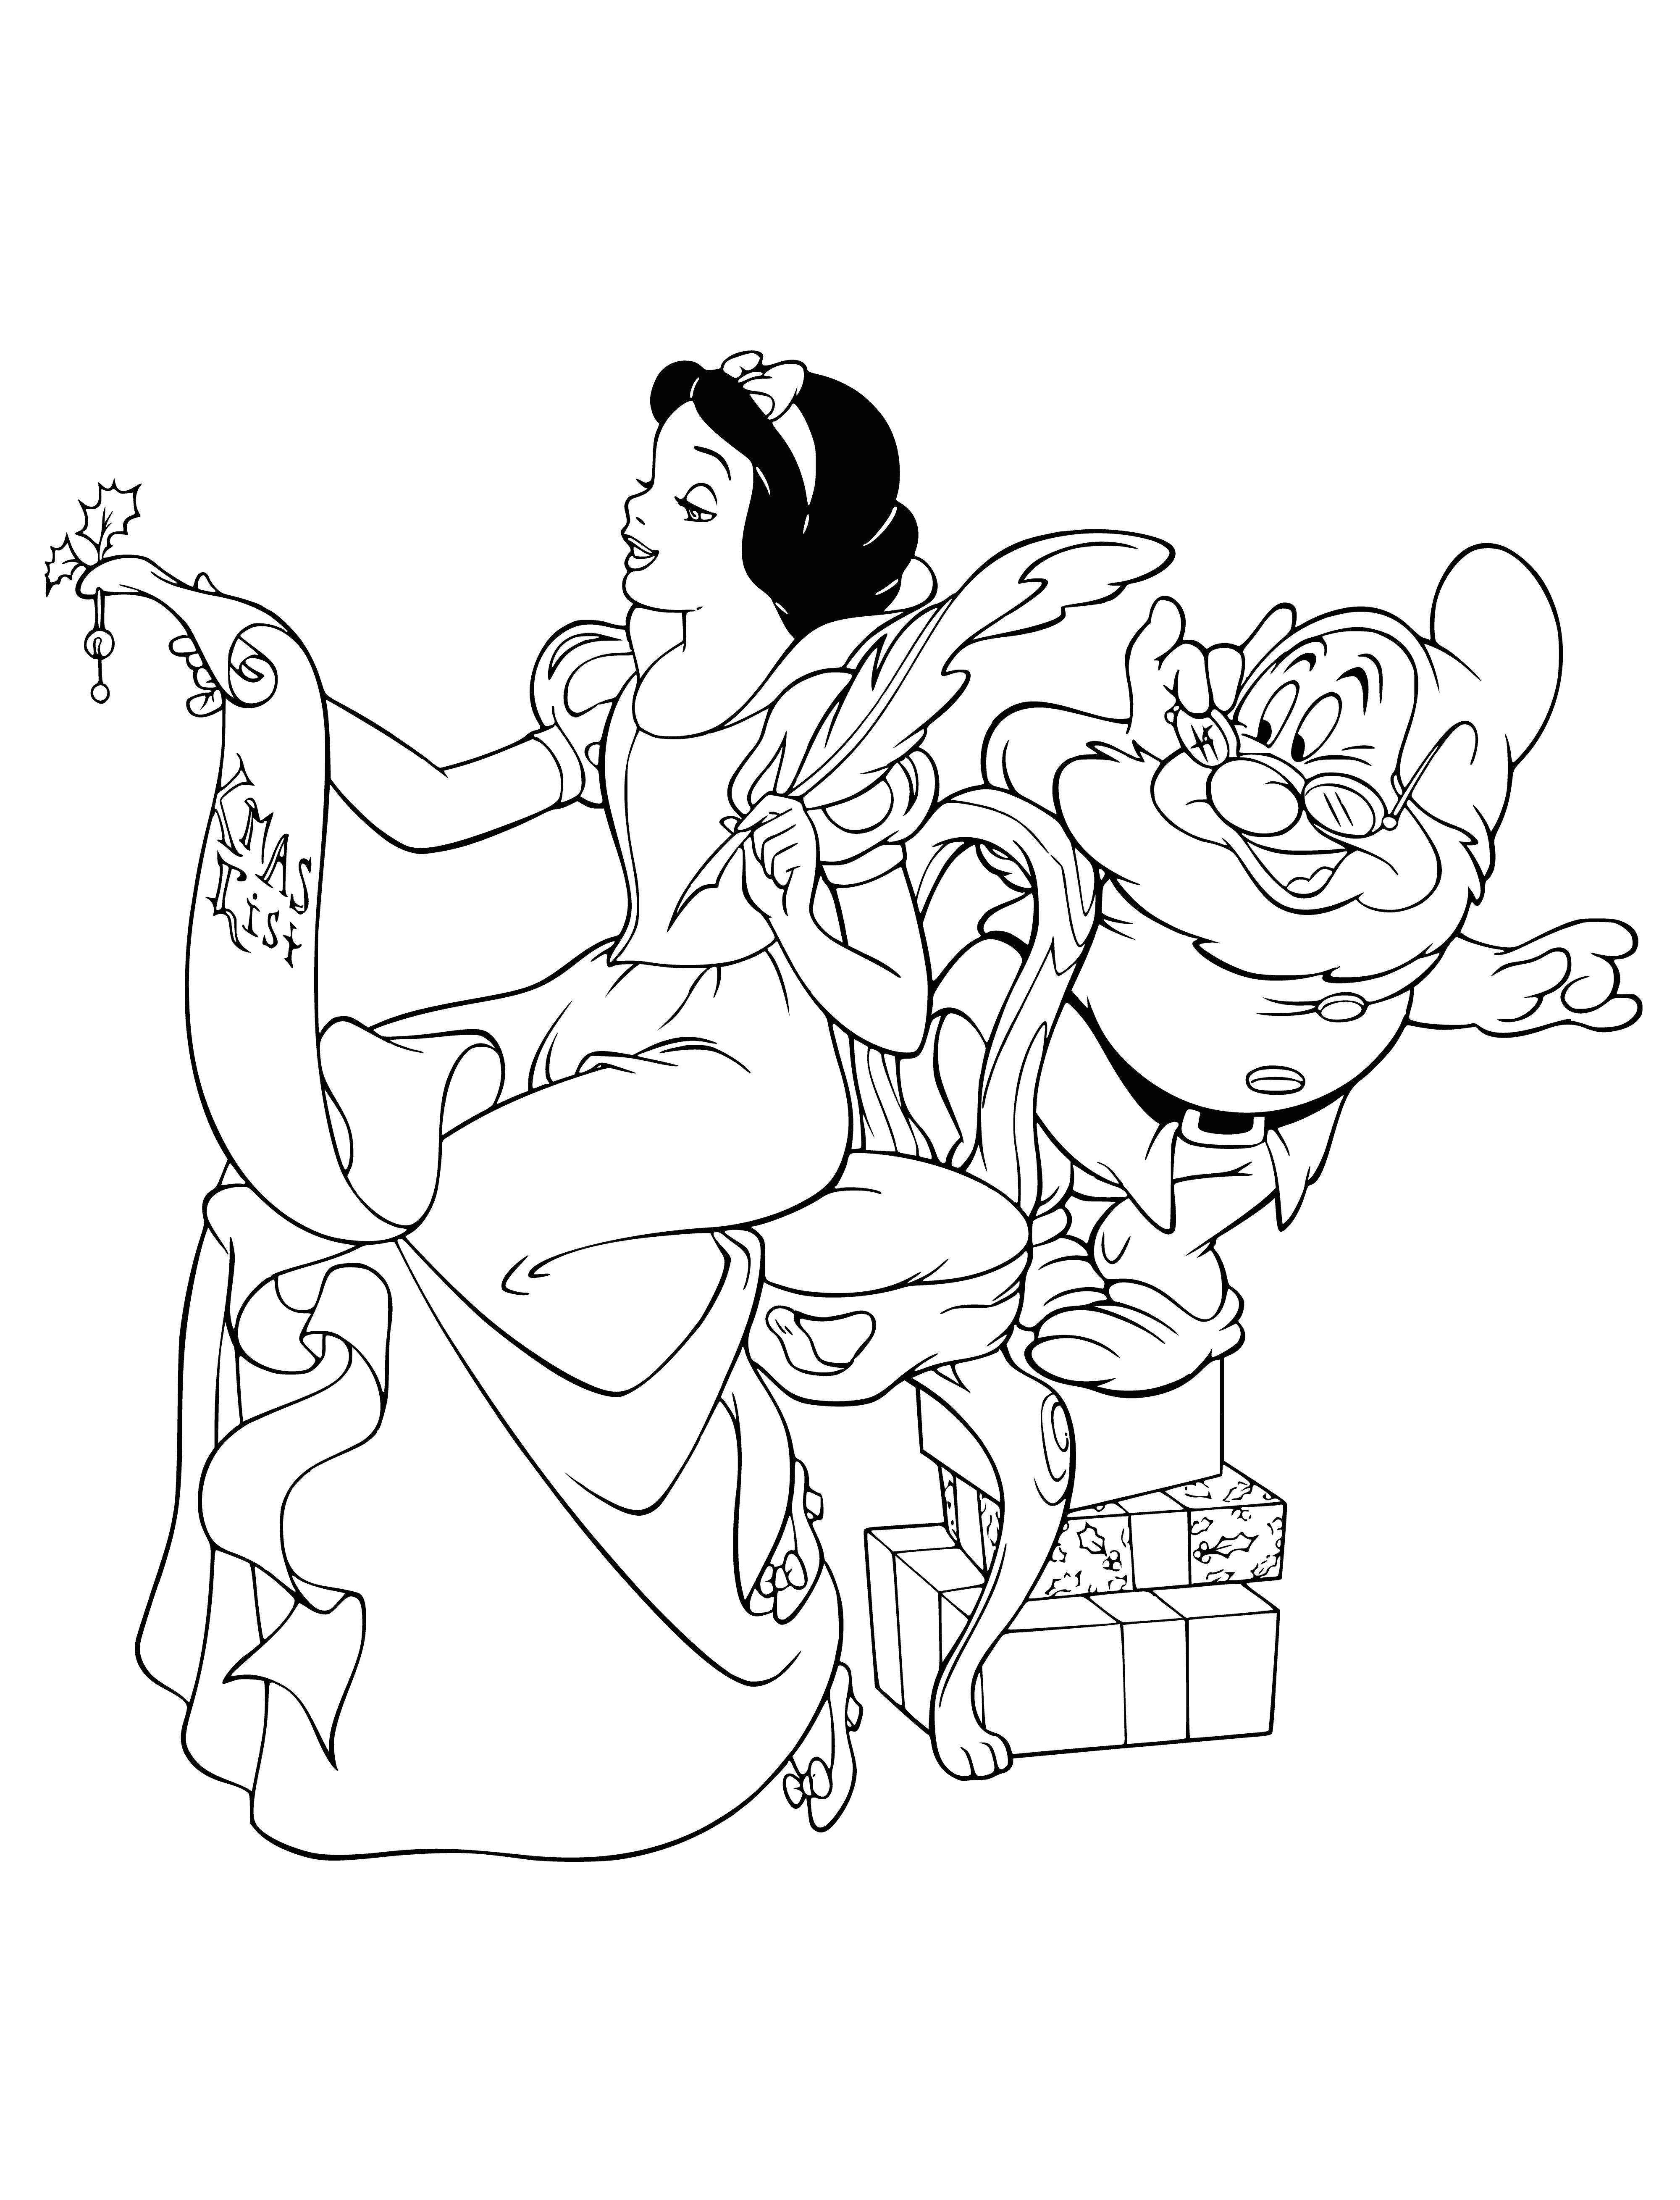 coloring page: Snow White stands at the head of a table full of Disney princesses, gifts in hand, smilling and basking in their joy.